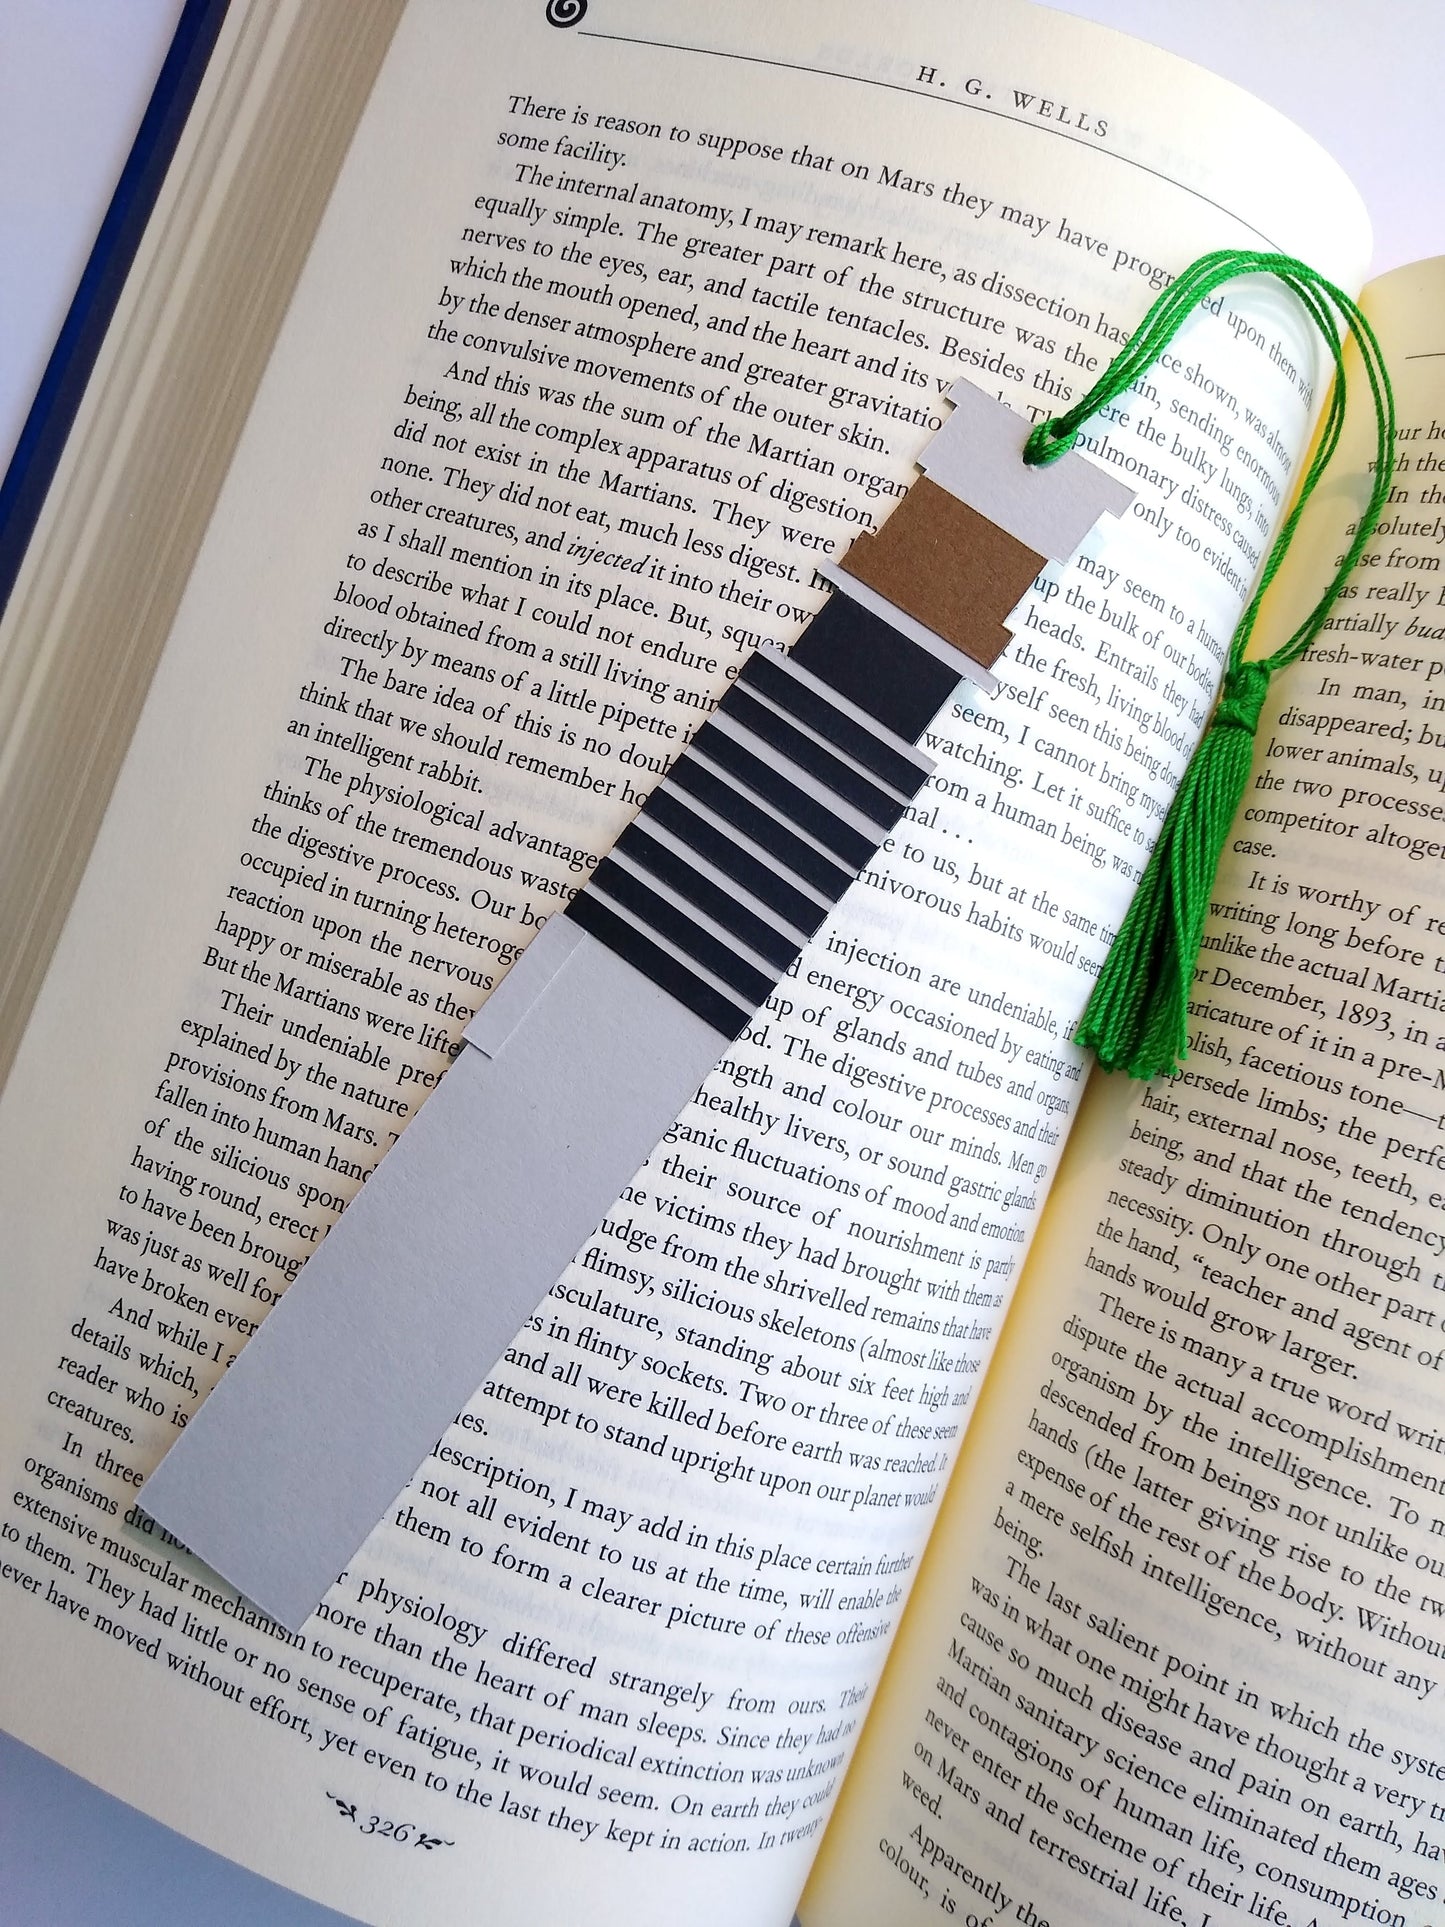 A bookmark designed like the handle of Luke Skywalker's lightsaber rests on top of an open book. The green tassel curls around and rests in dip between the pages.